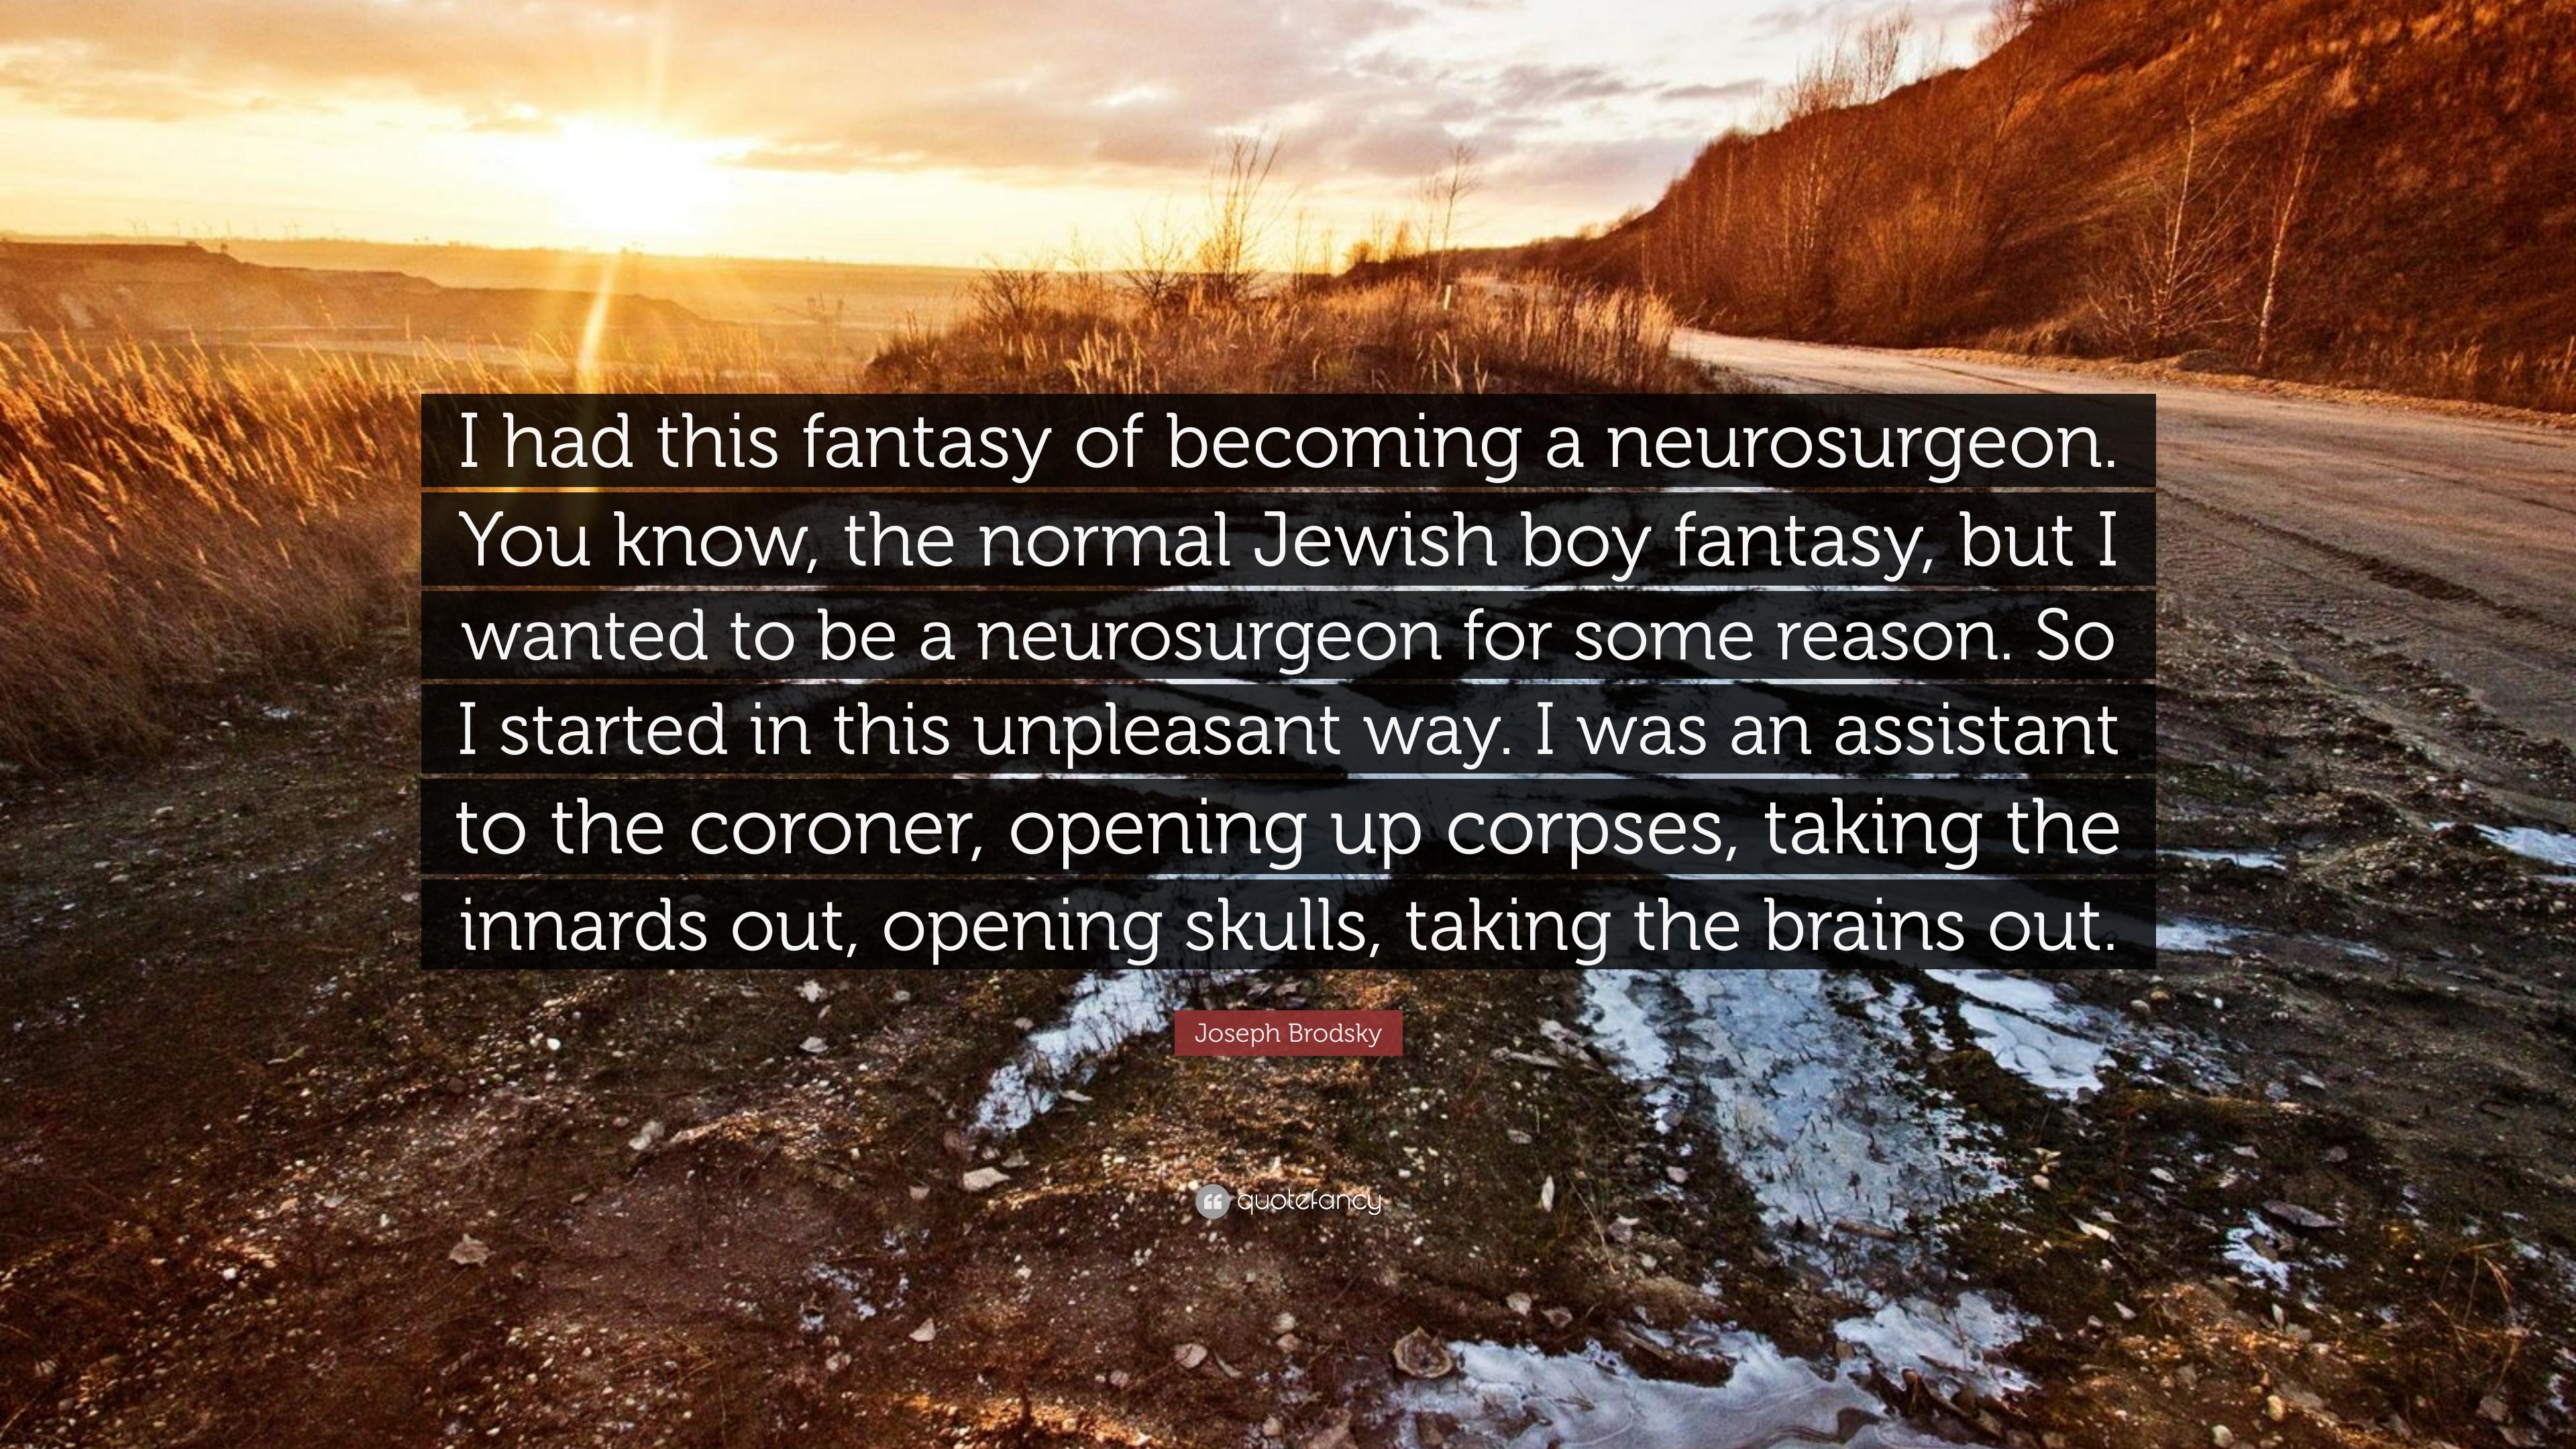 Joseph Brodsky Quote: “I had this fantasy of becoming a neurosurgeon